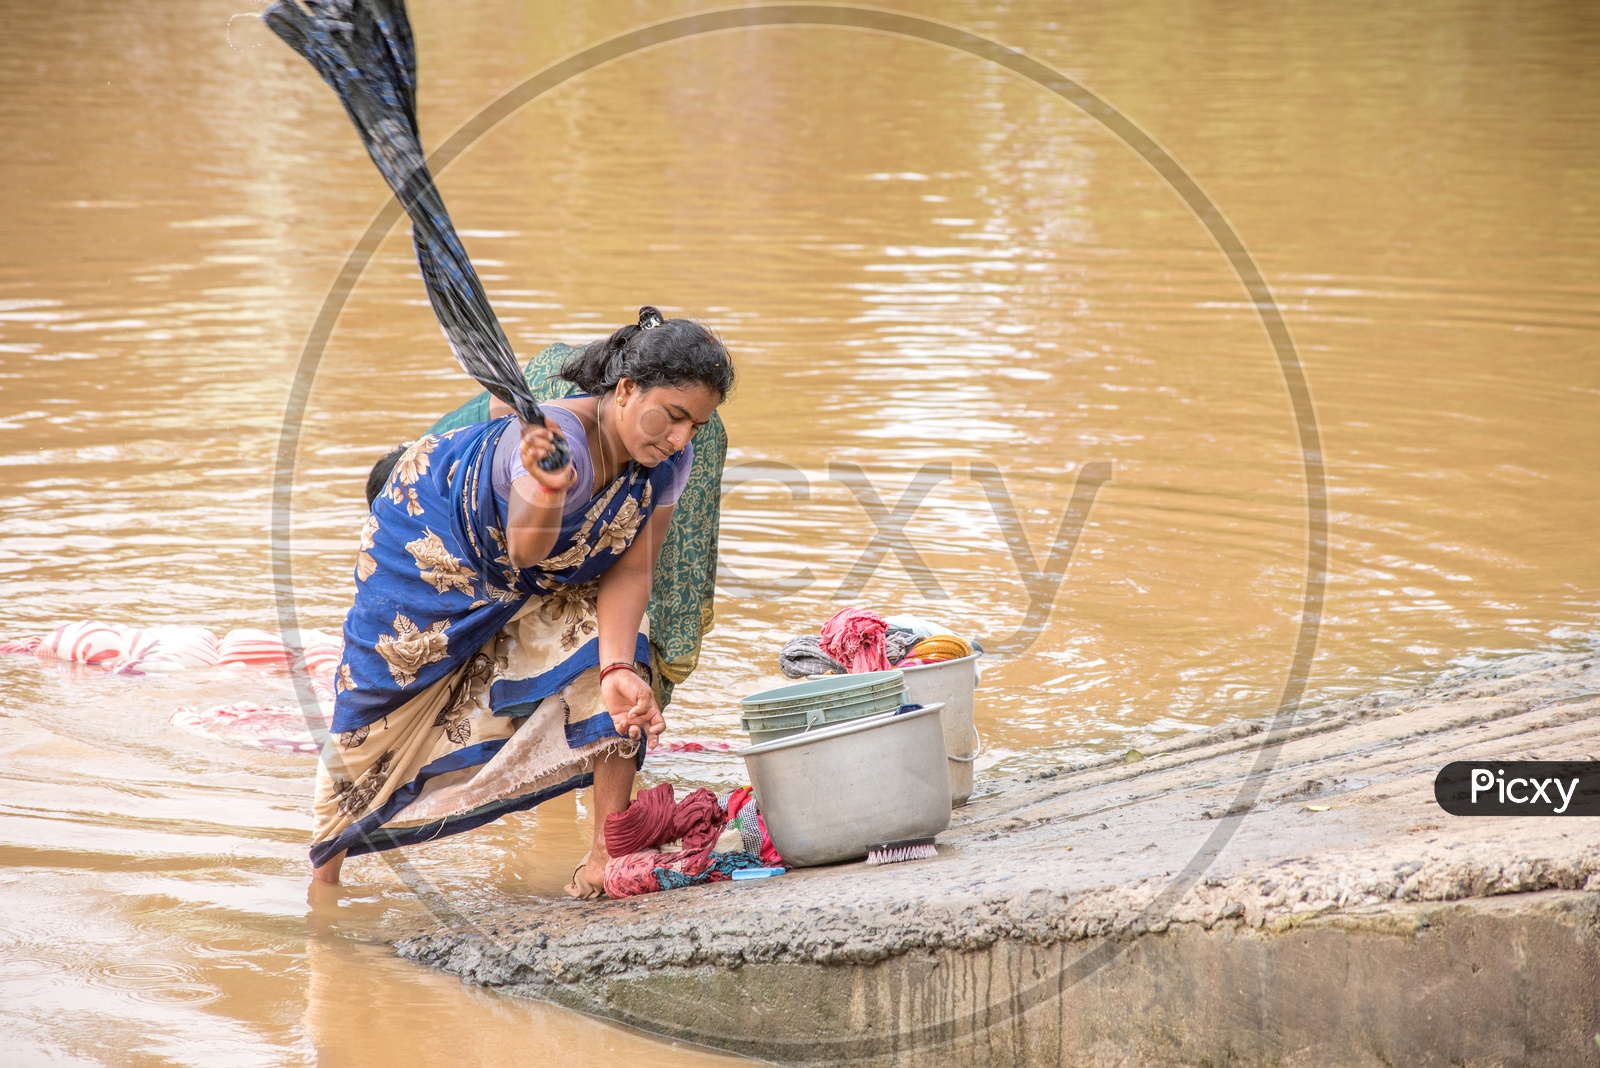 villagers using river water for washing clothes